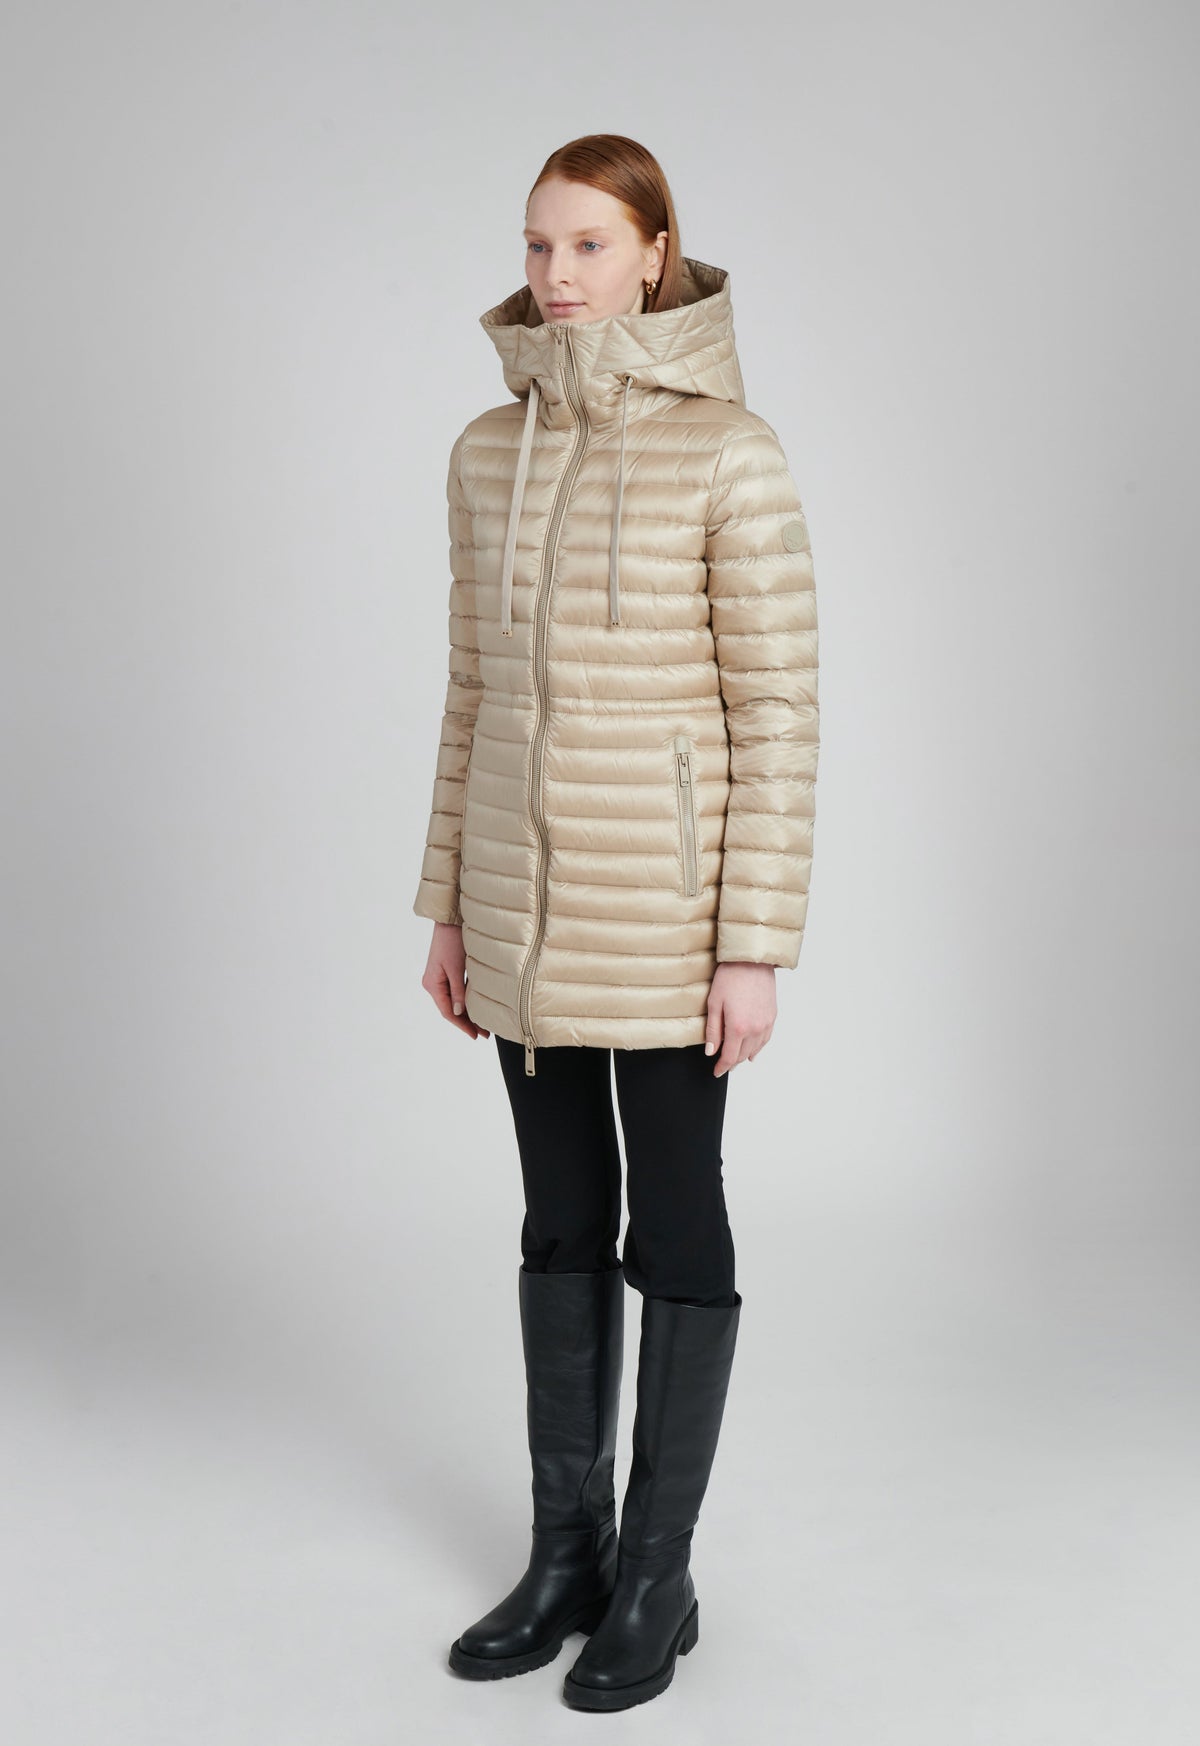 lightweight mid length puffer jacket in champagne color